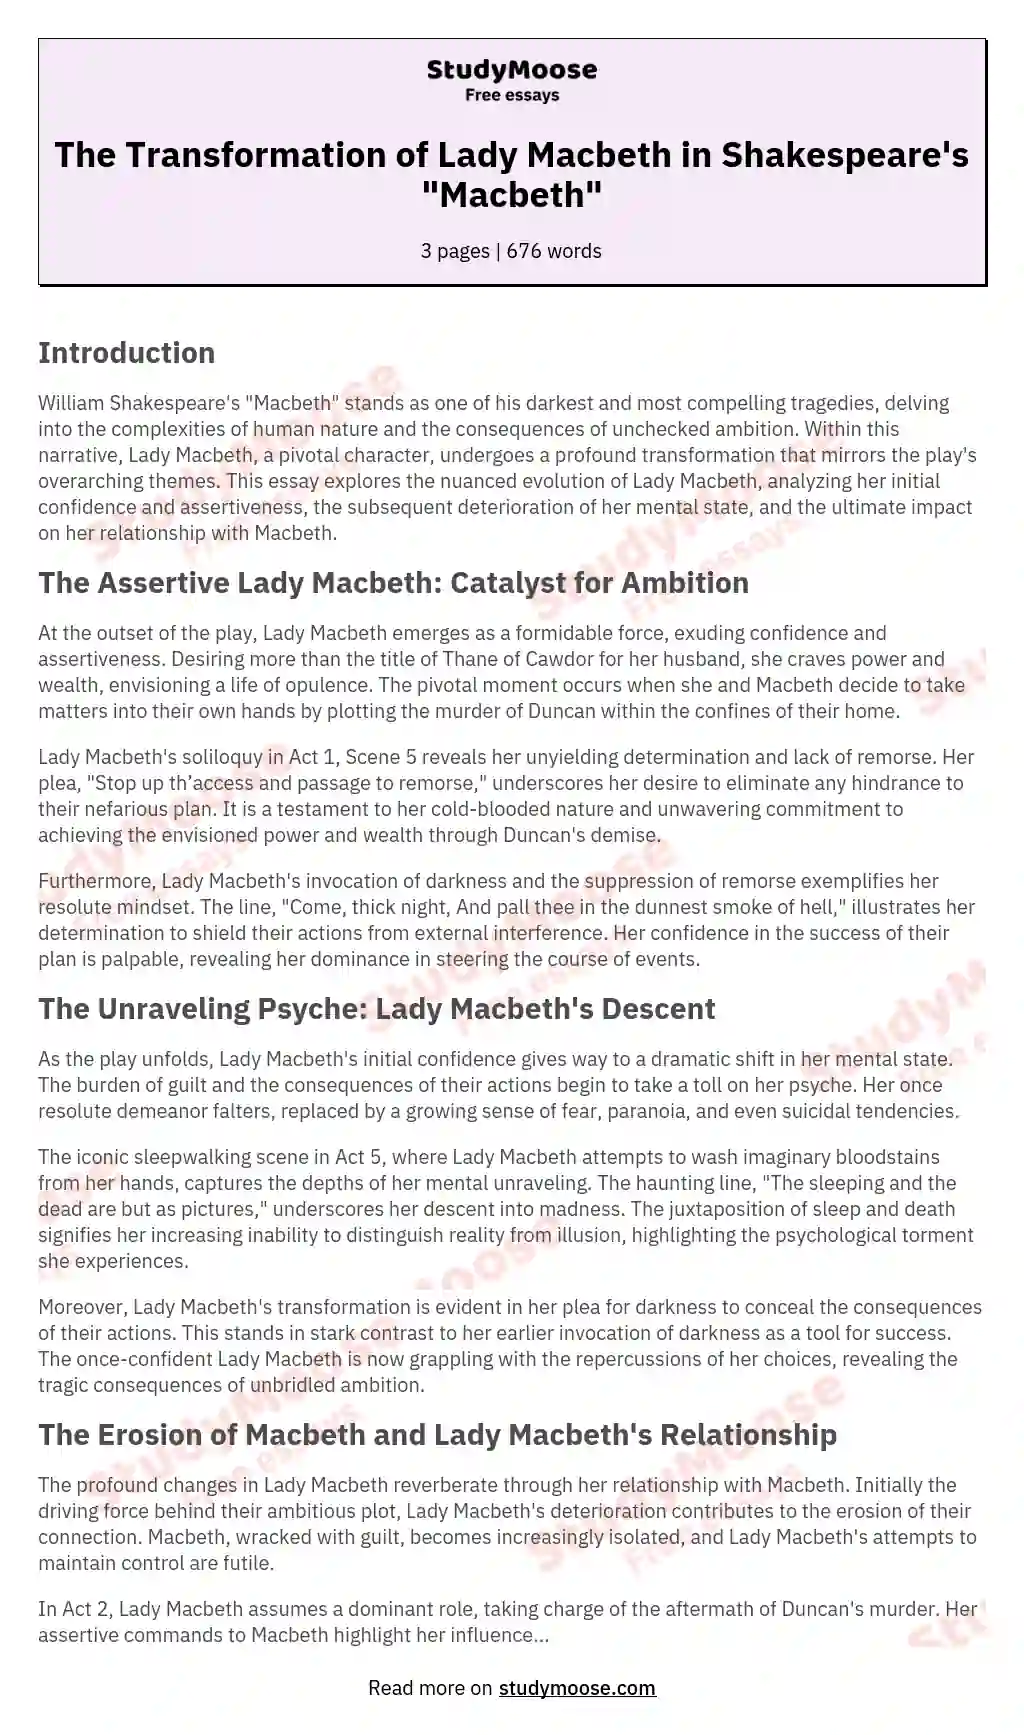 essay on how lady macbeth changes throughout the play